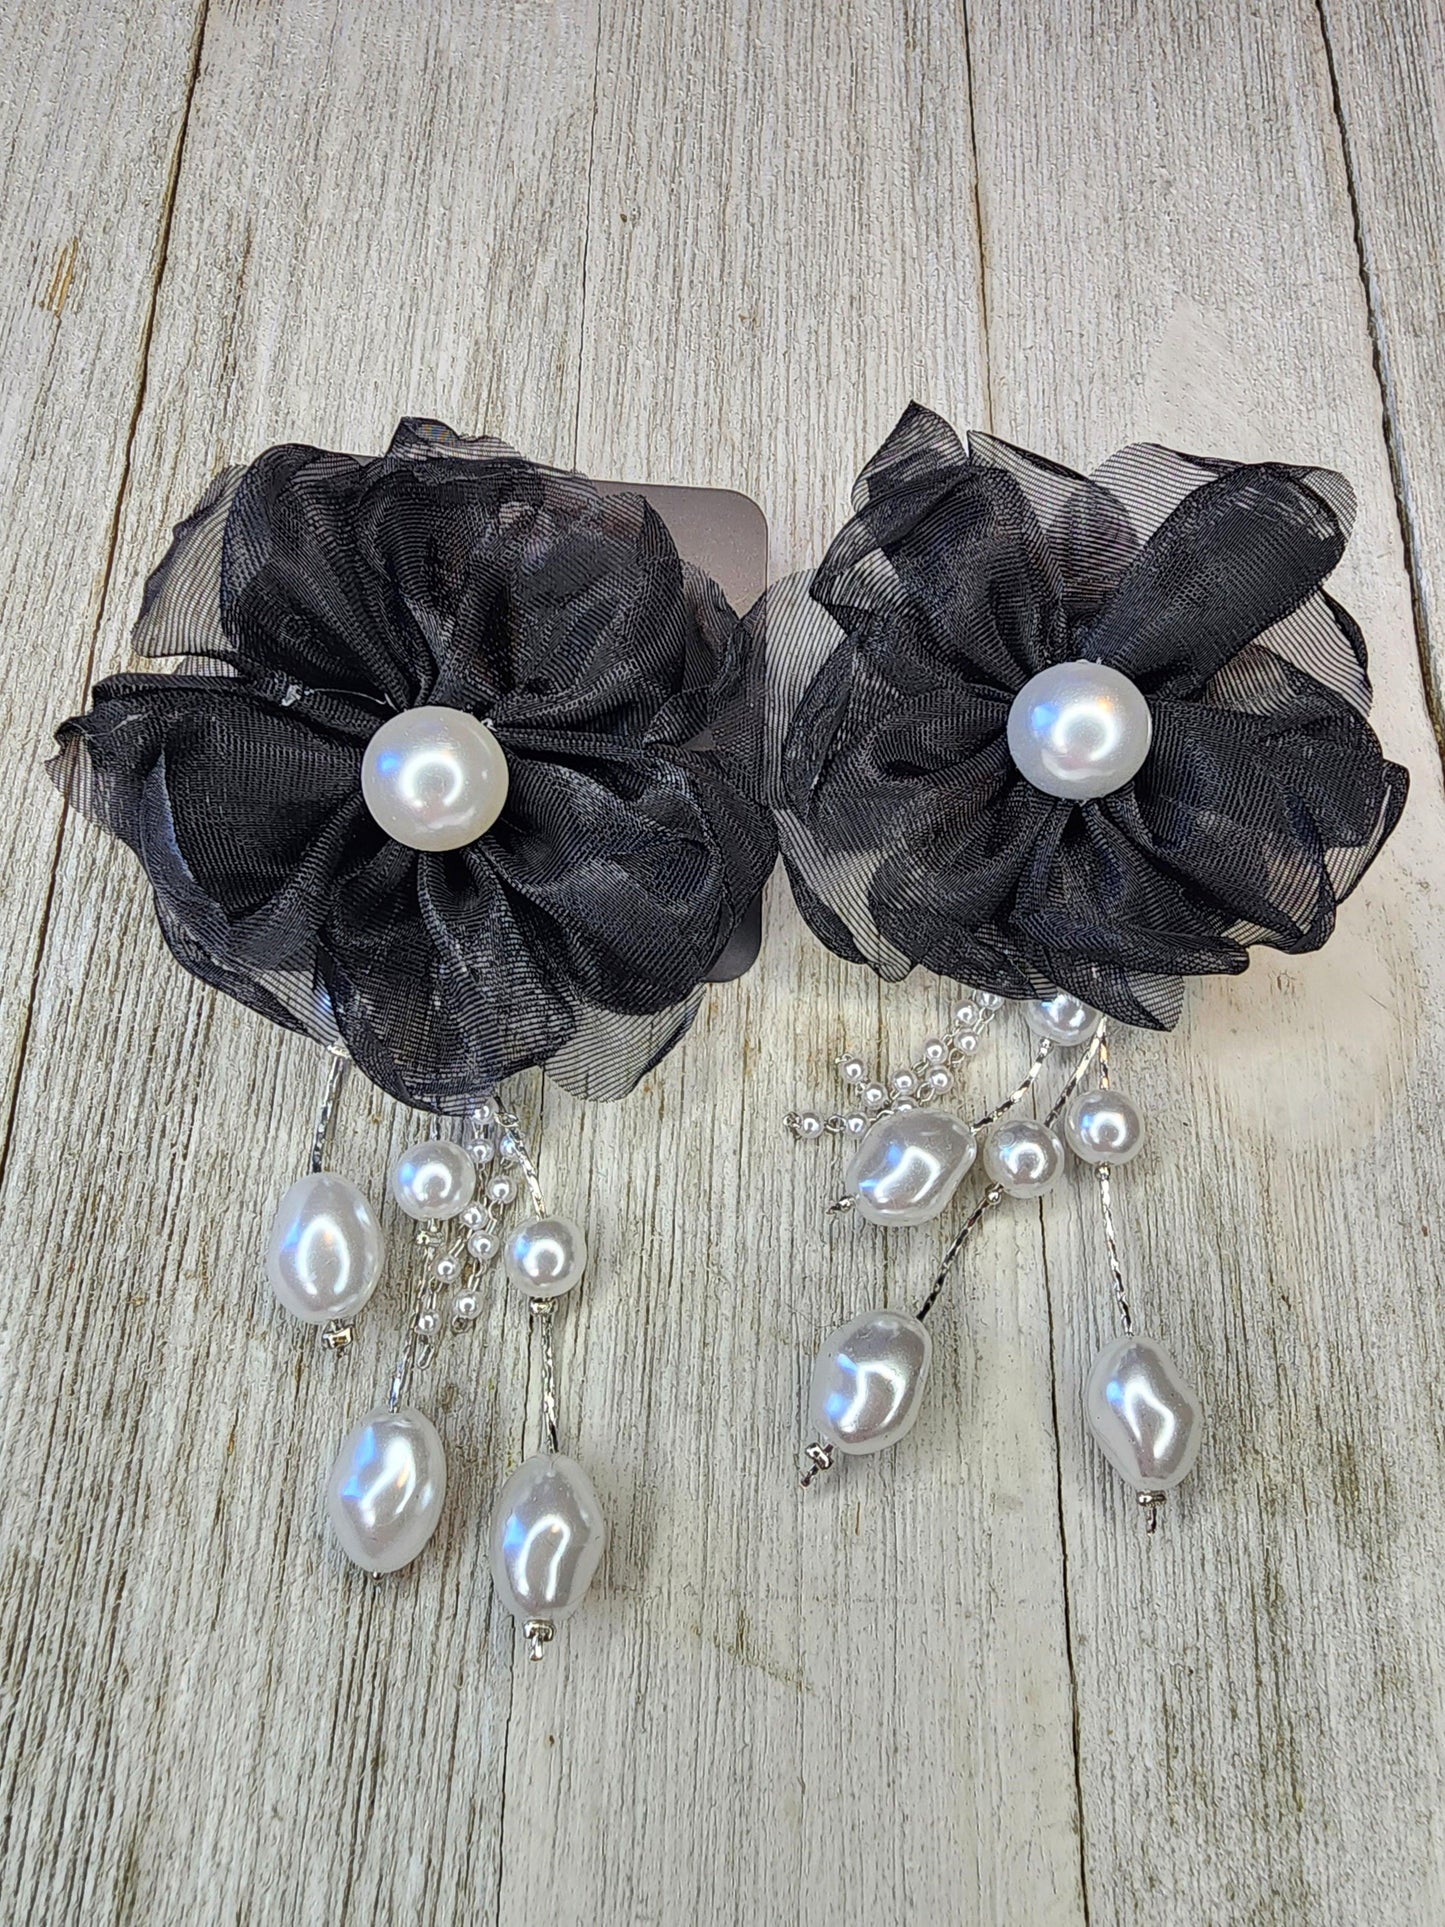 Paparazzi Accessories - Dripping In Decadence - Black Earrings - Bling by JessieK